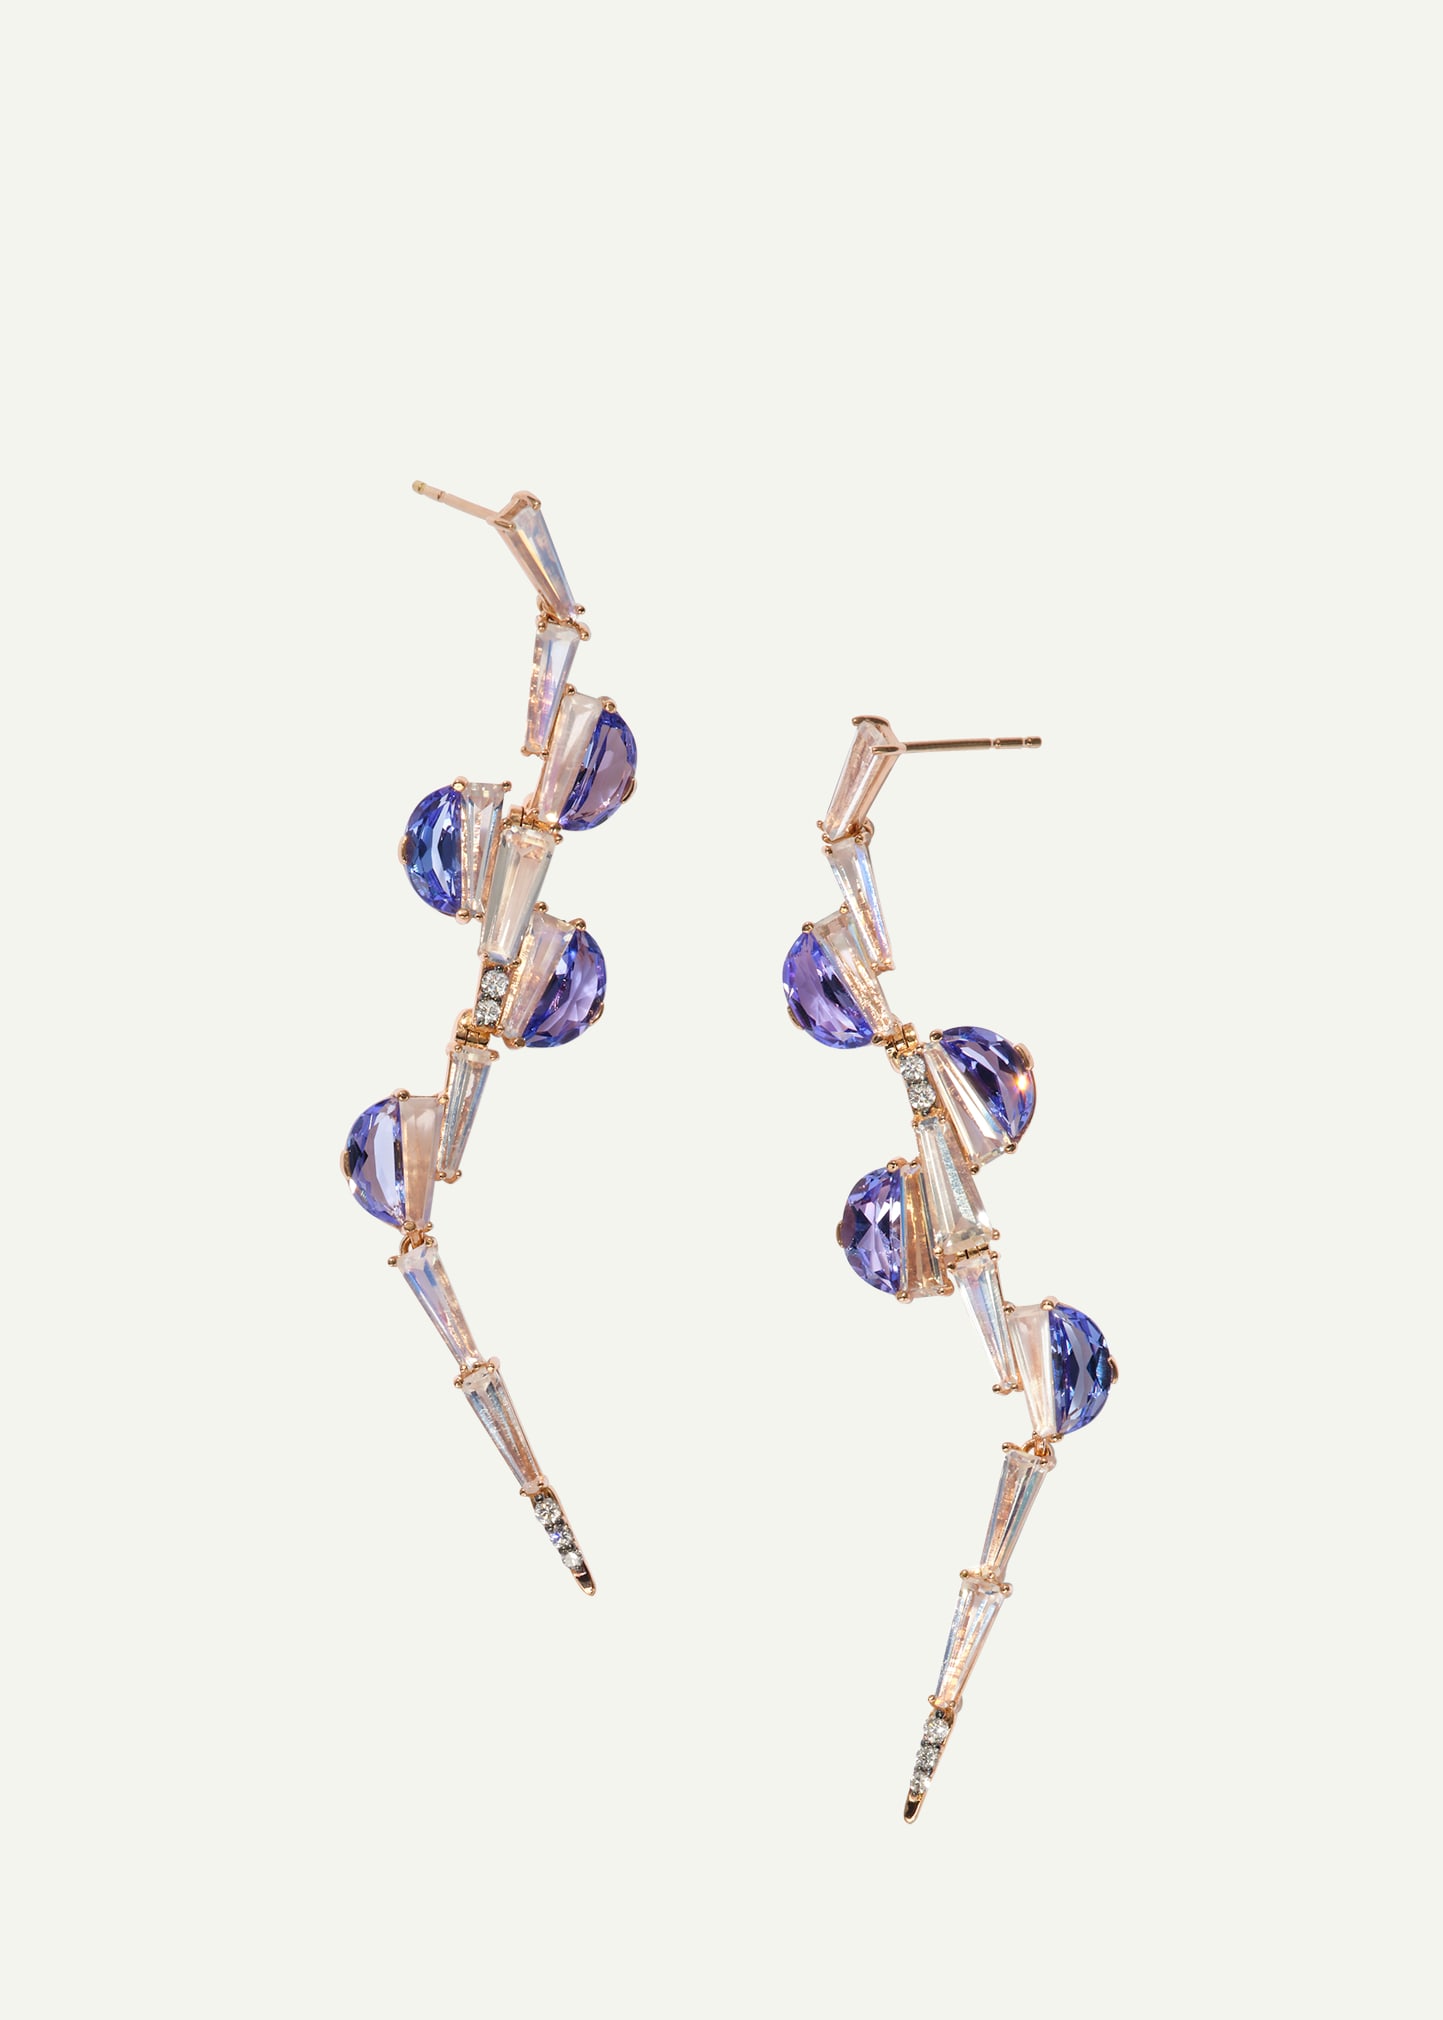 20K Rose Gold Switchback Earrings with Diamonds, Tanzanite and Rainbow Moonstone